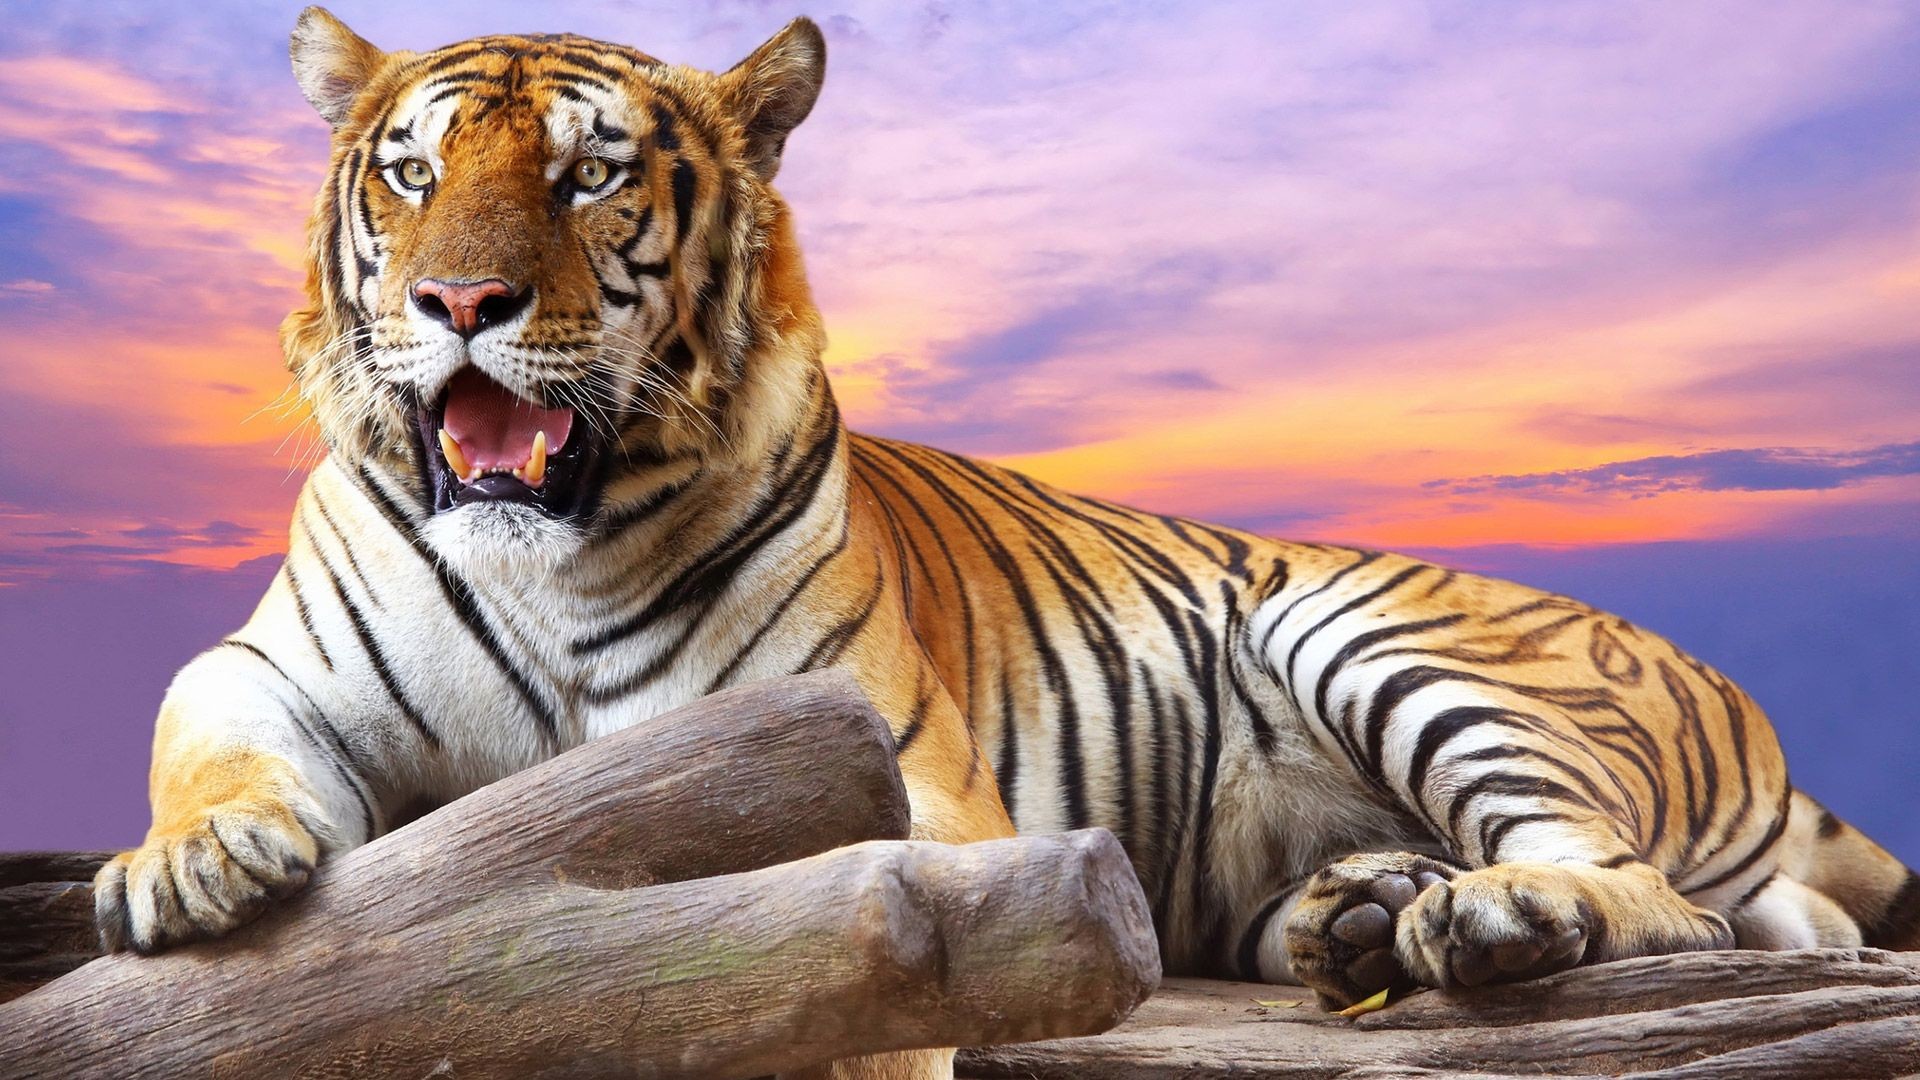 Wild Tiger in mood wallpapers – Free full hd wallpapers for 1080p .